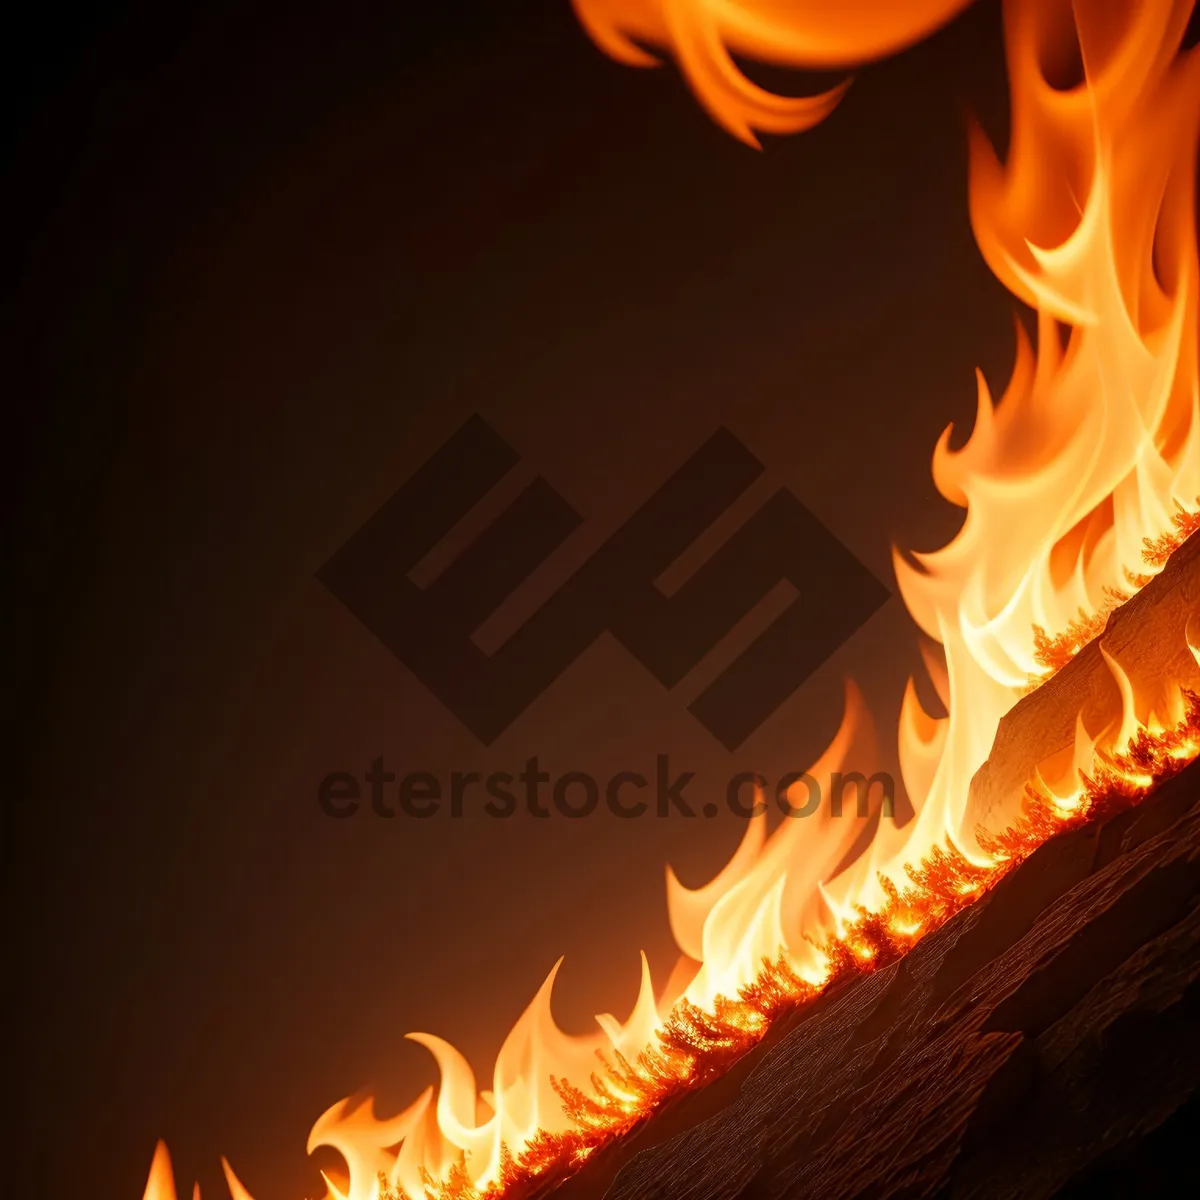 Picture of Blazing Fire: Fiery Inferno of Warmth and Danger